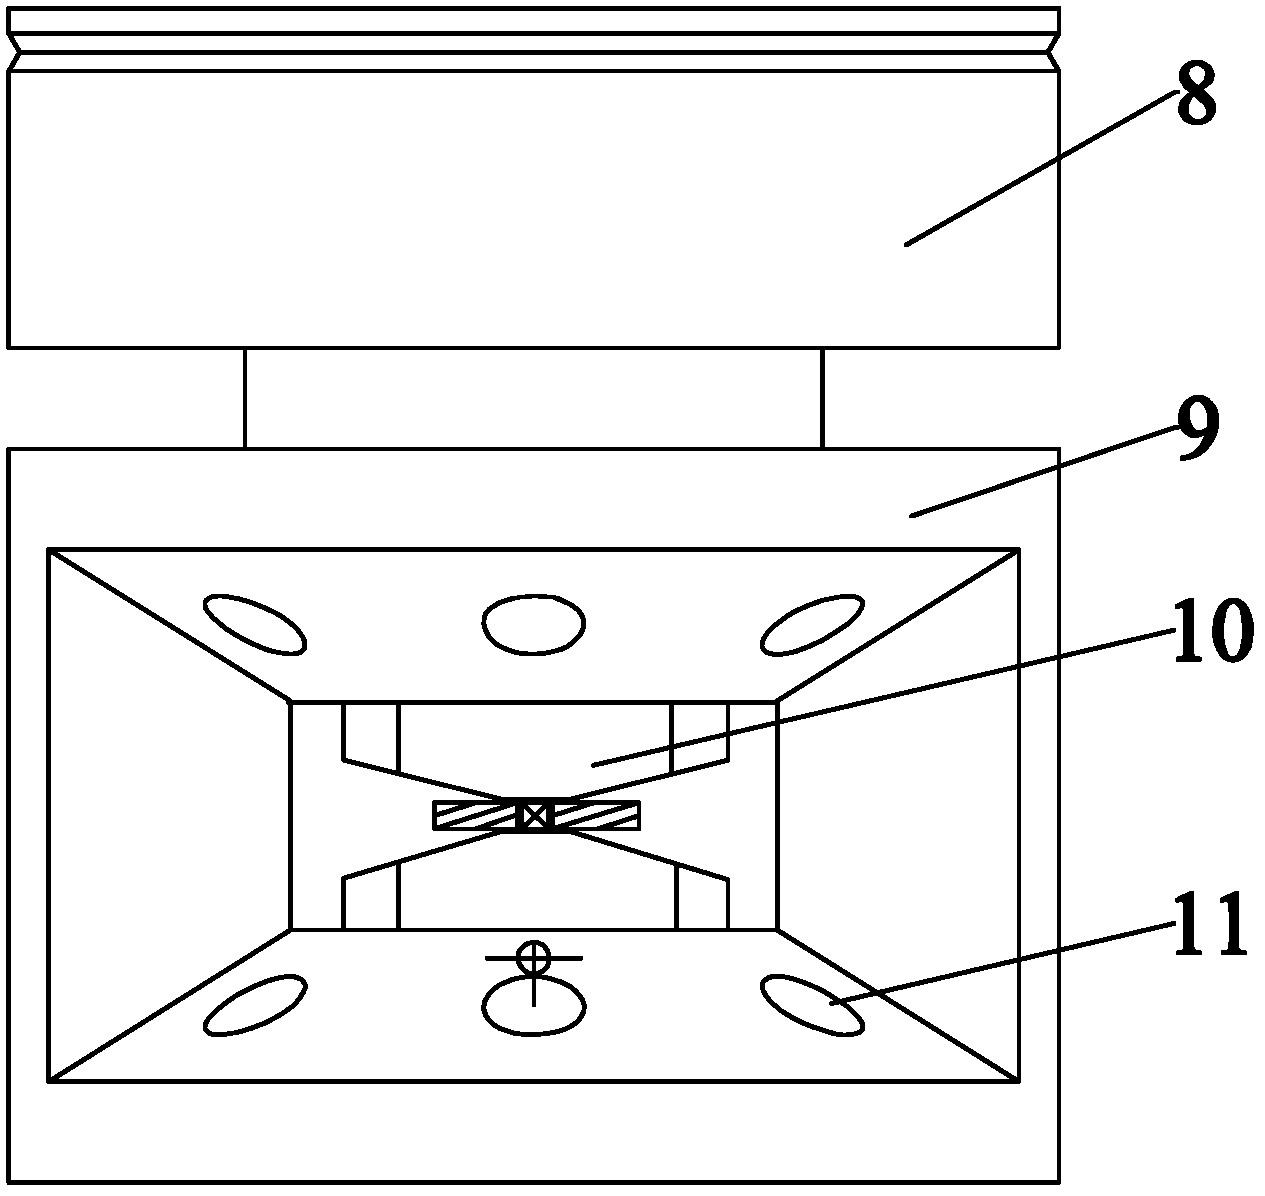 Anvil cell high pressure device for in situ neutron diffraction